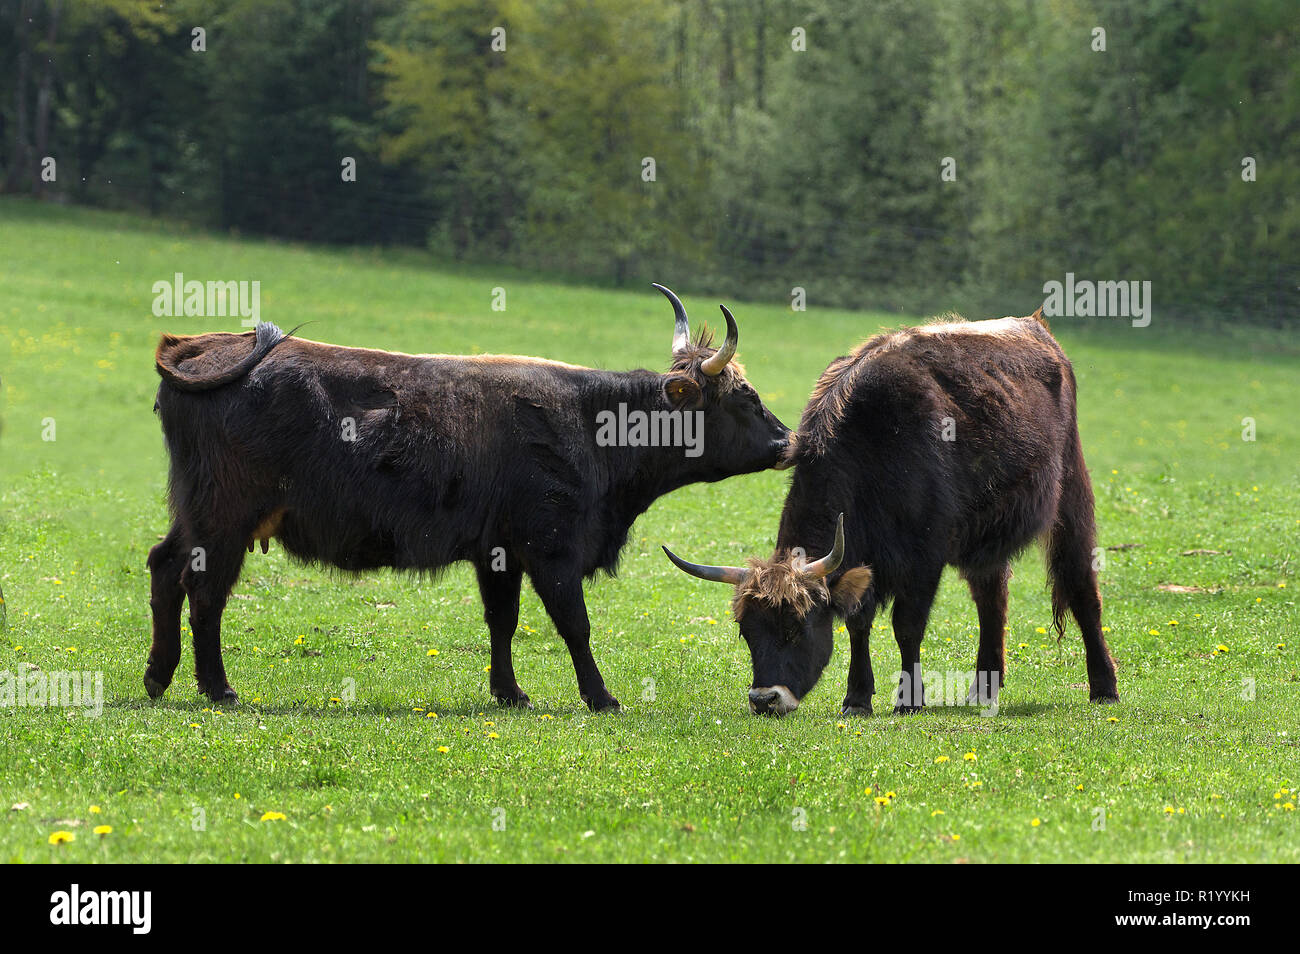 Recreated Aurochs, Heck Cattle (Bos primigenius primigenius). Two cows on a meadow, one sniffing at the other. Germany Stock Photo